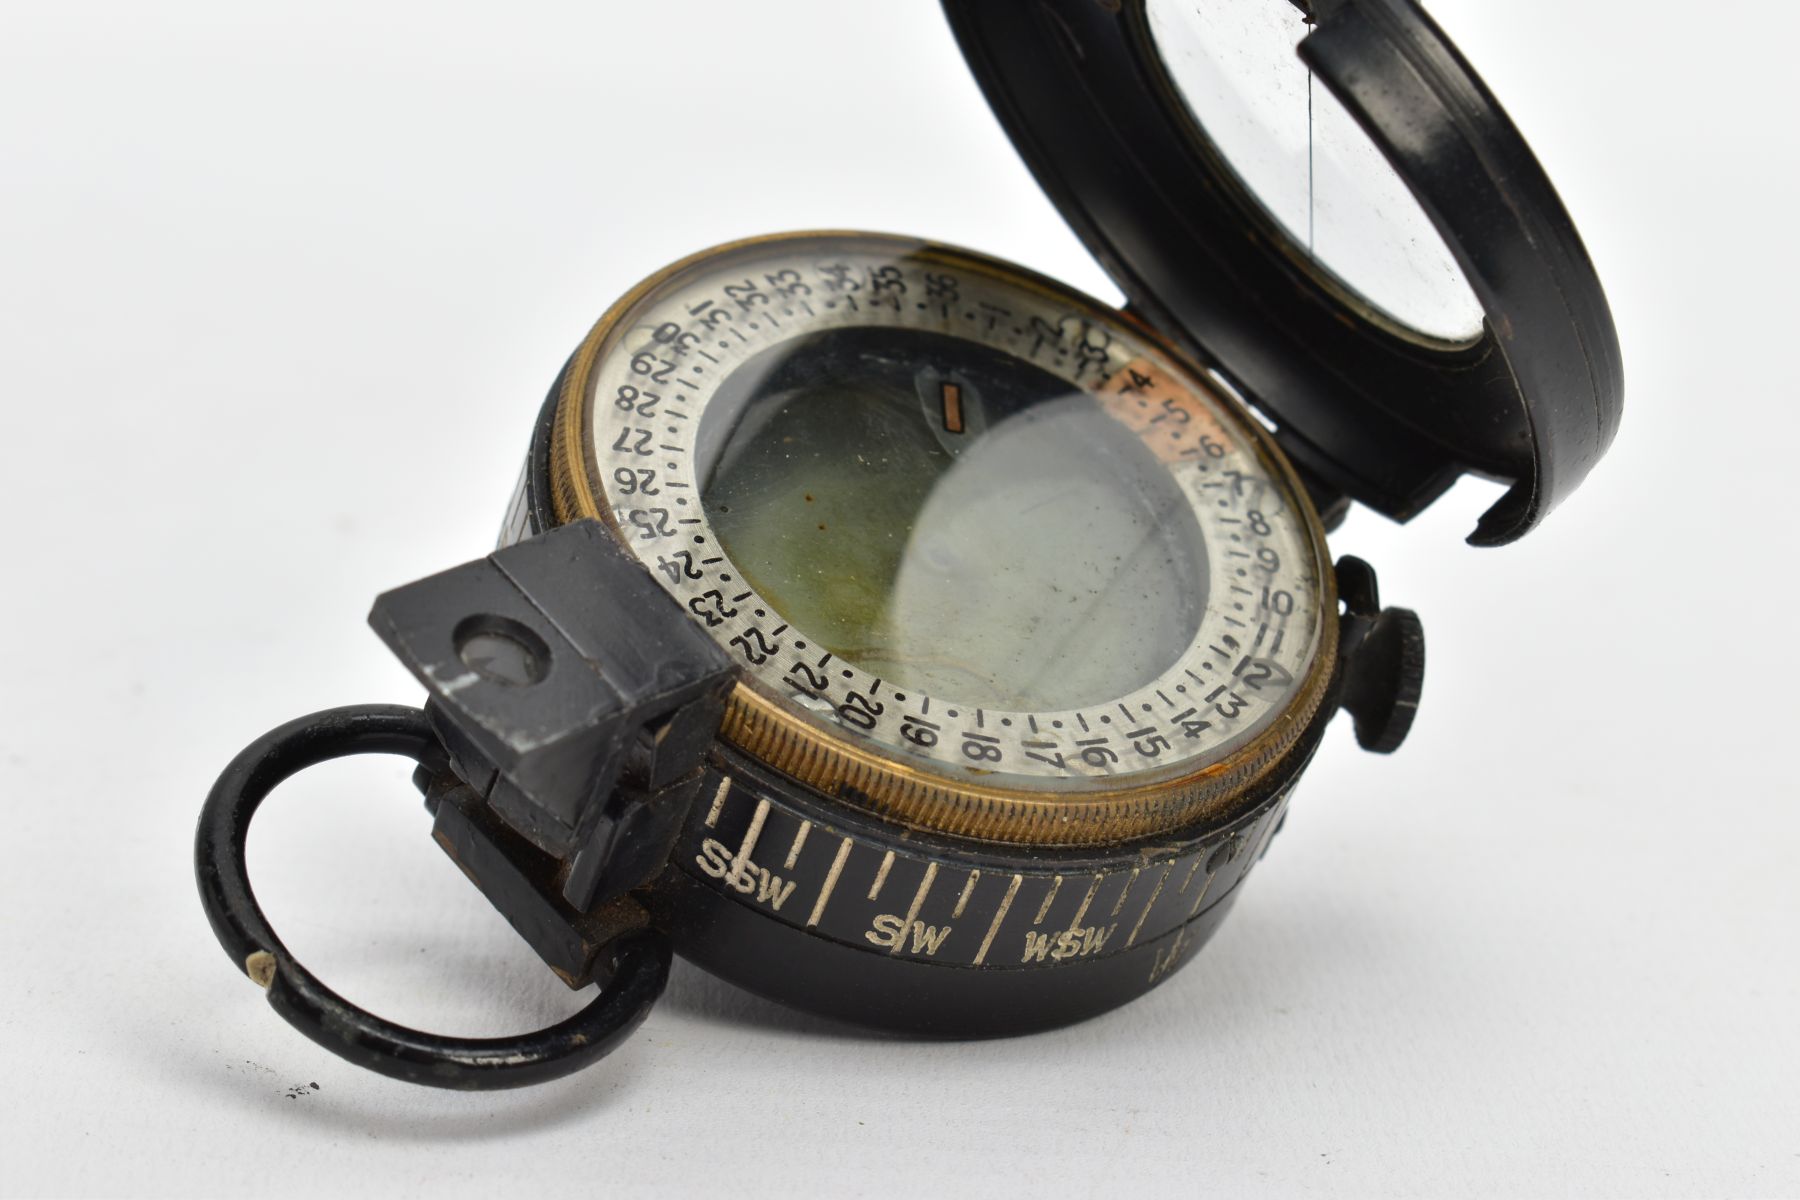 A MILITARY COMPASS, black compass, stamped T.G.C2 Ltd London number 234303, dated 1943 MK III - Image 7 of 7